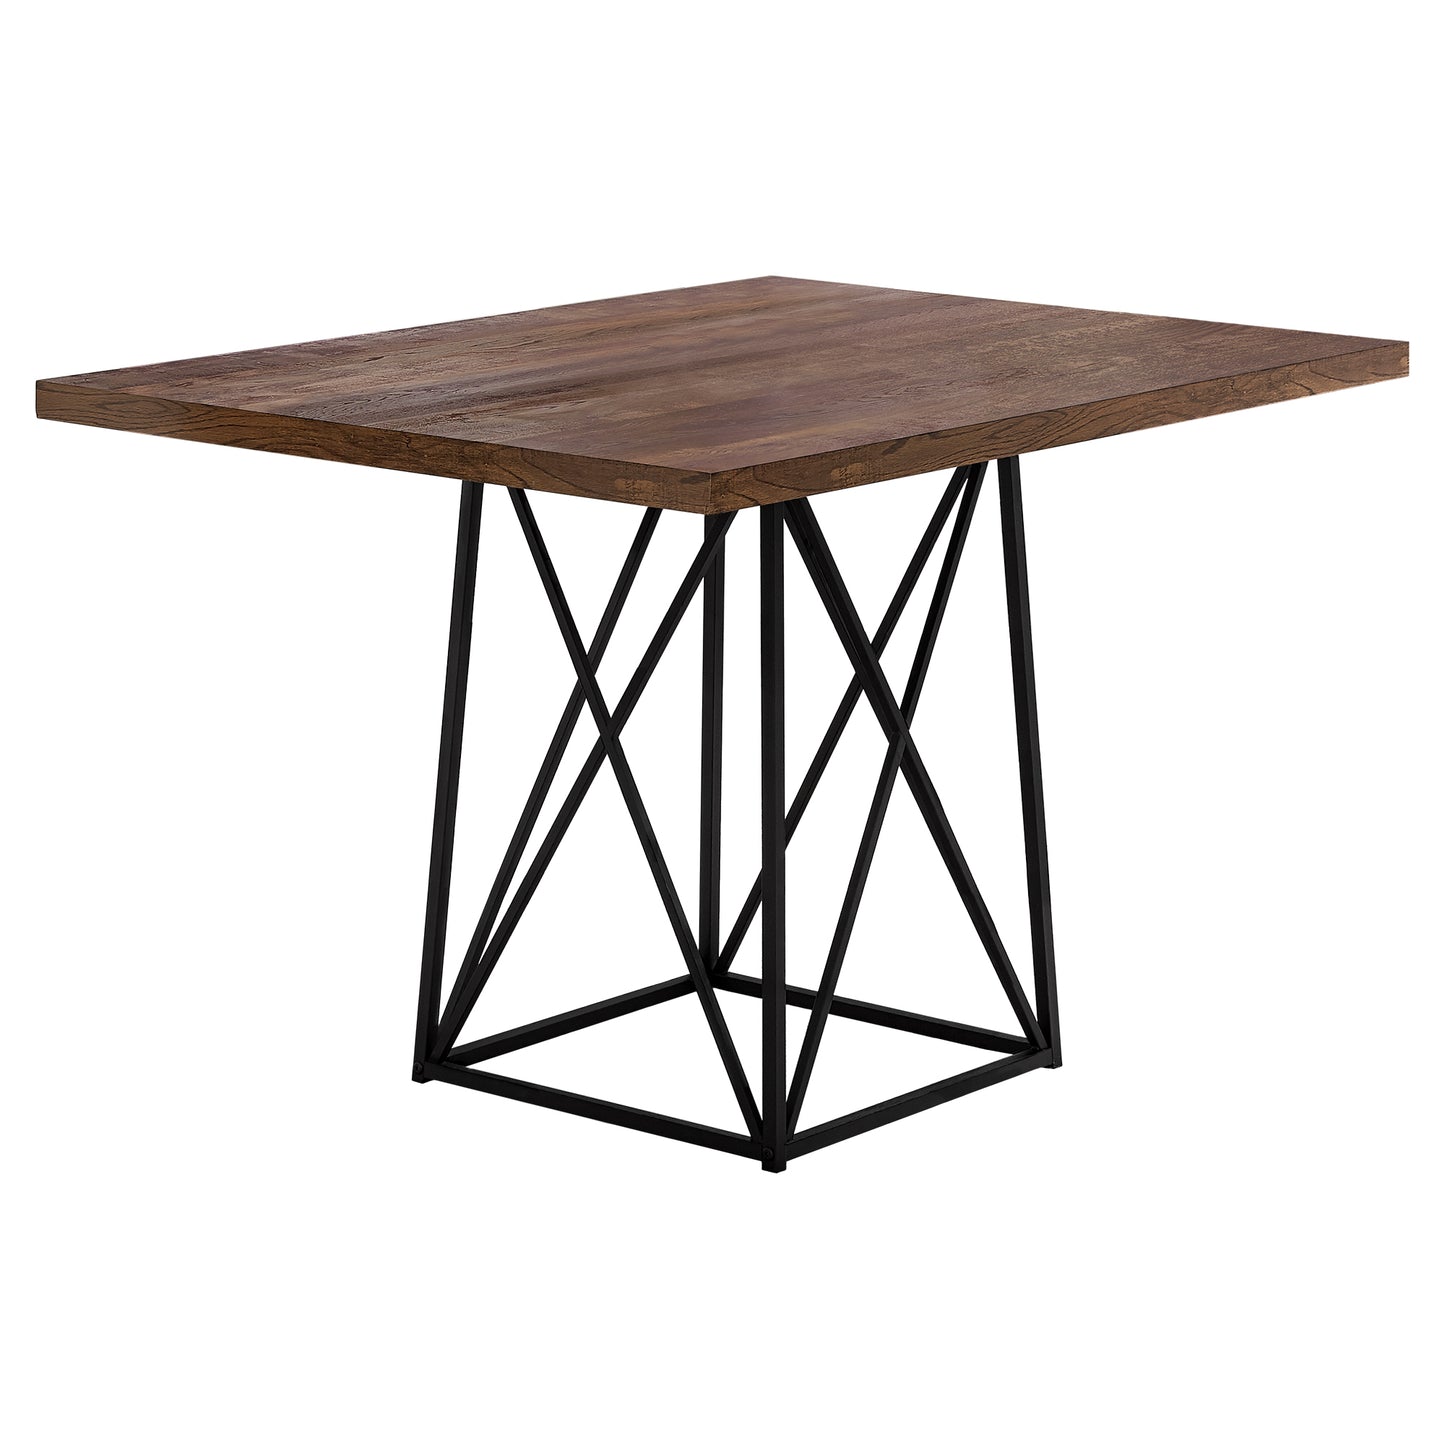 36" Brown And Black Rectangular Solid Wood And Metal Dining Table